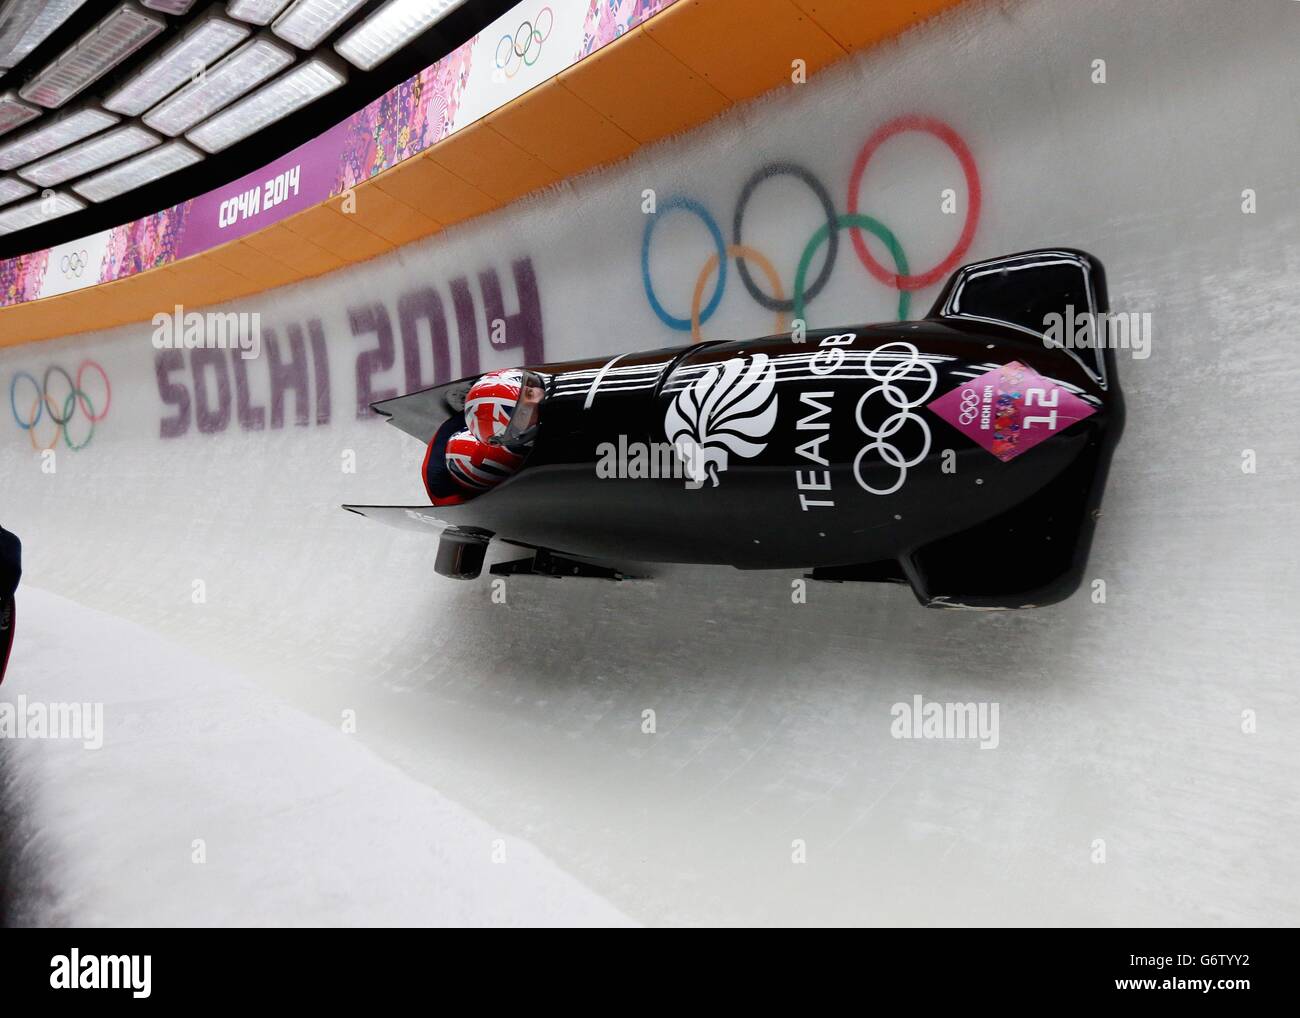 Great Britain's Paula Walker and Rebekah Wilson in the Women's Bobsleigh during the 2014 Sochi Olympic Games in Sochi, Russia. Stock Photo